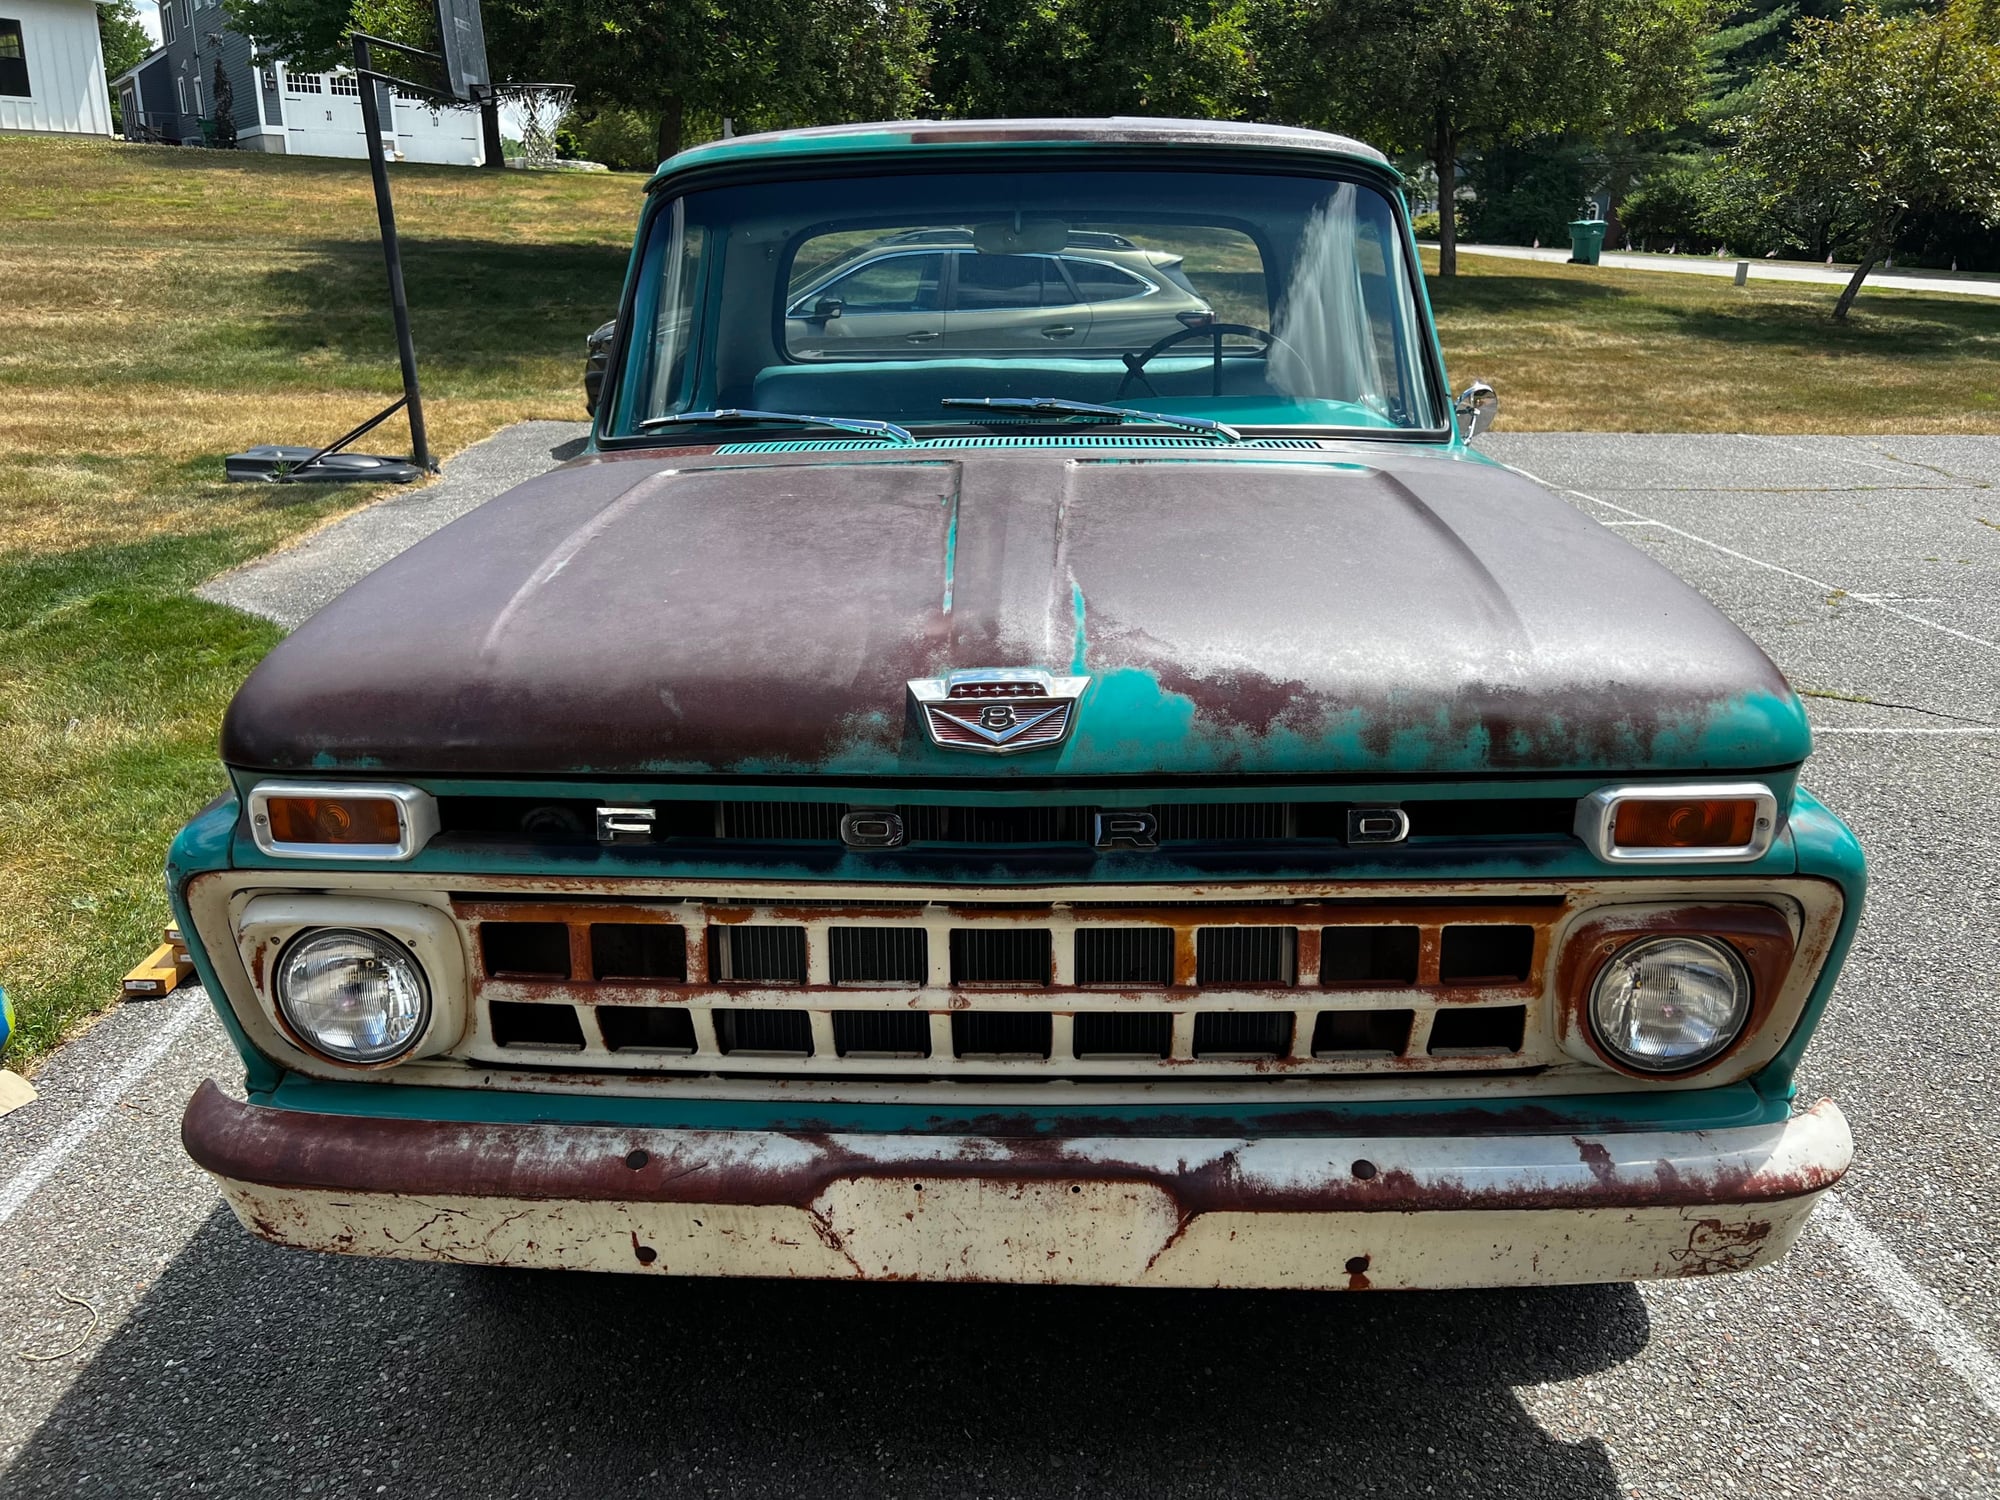 Exterior Body Parts - Correct white bumper with patina for 65 F100 - Used - 1964 to 1977 Ford F-100 - Groton, MA 01450, United States